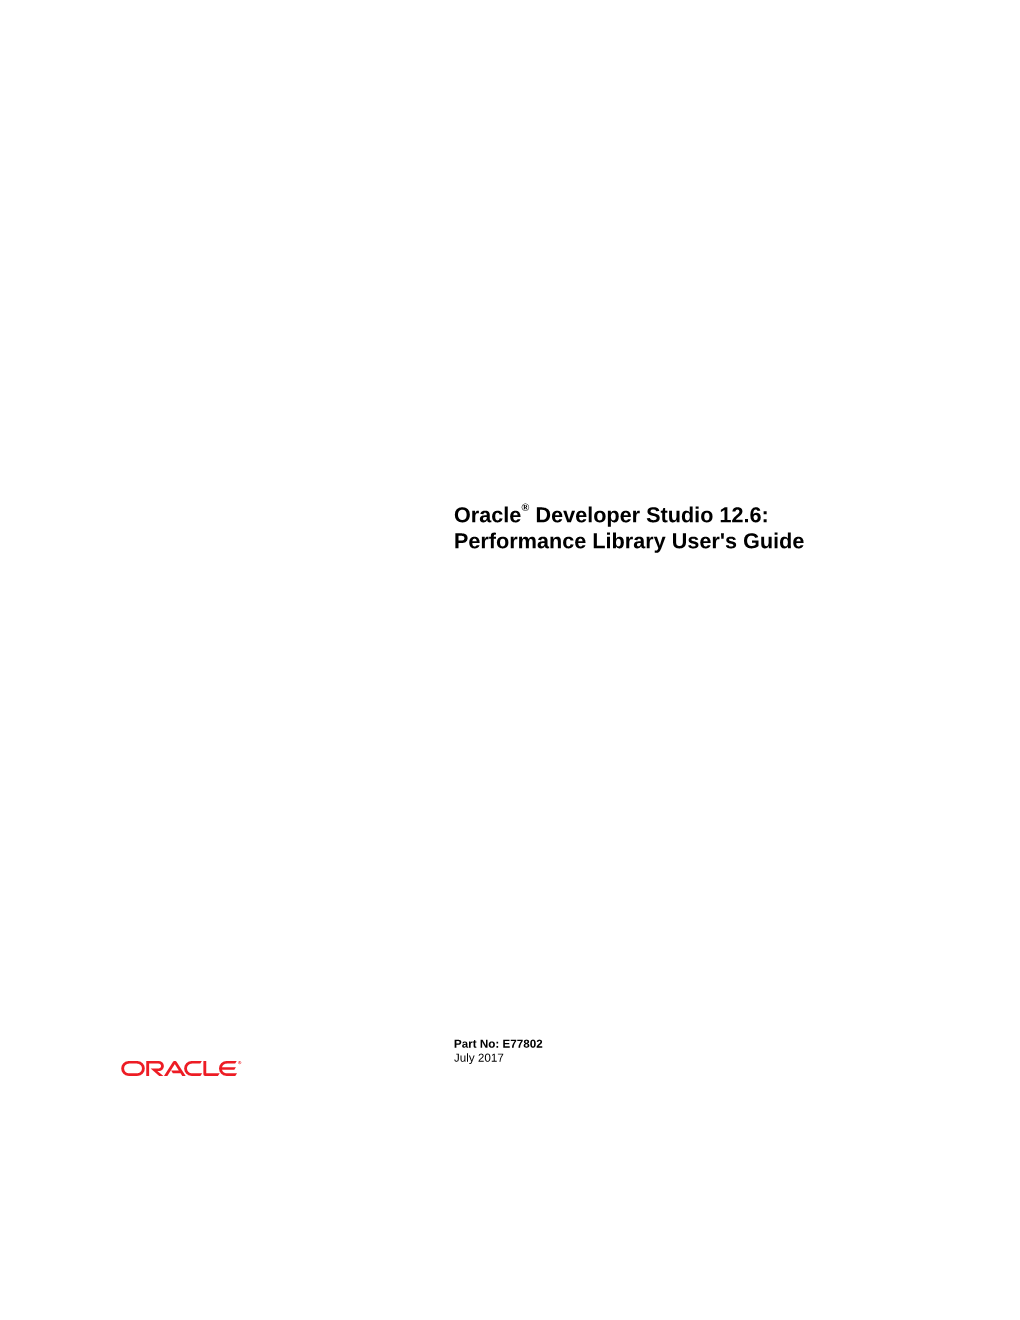 Oracle® Developer Studio 12.6: Performance Library User's Guide